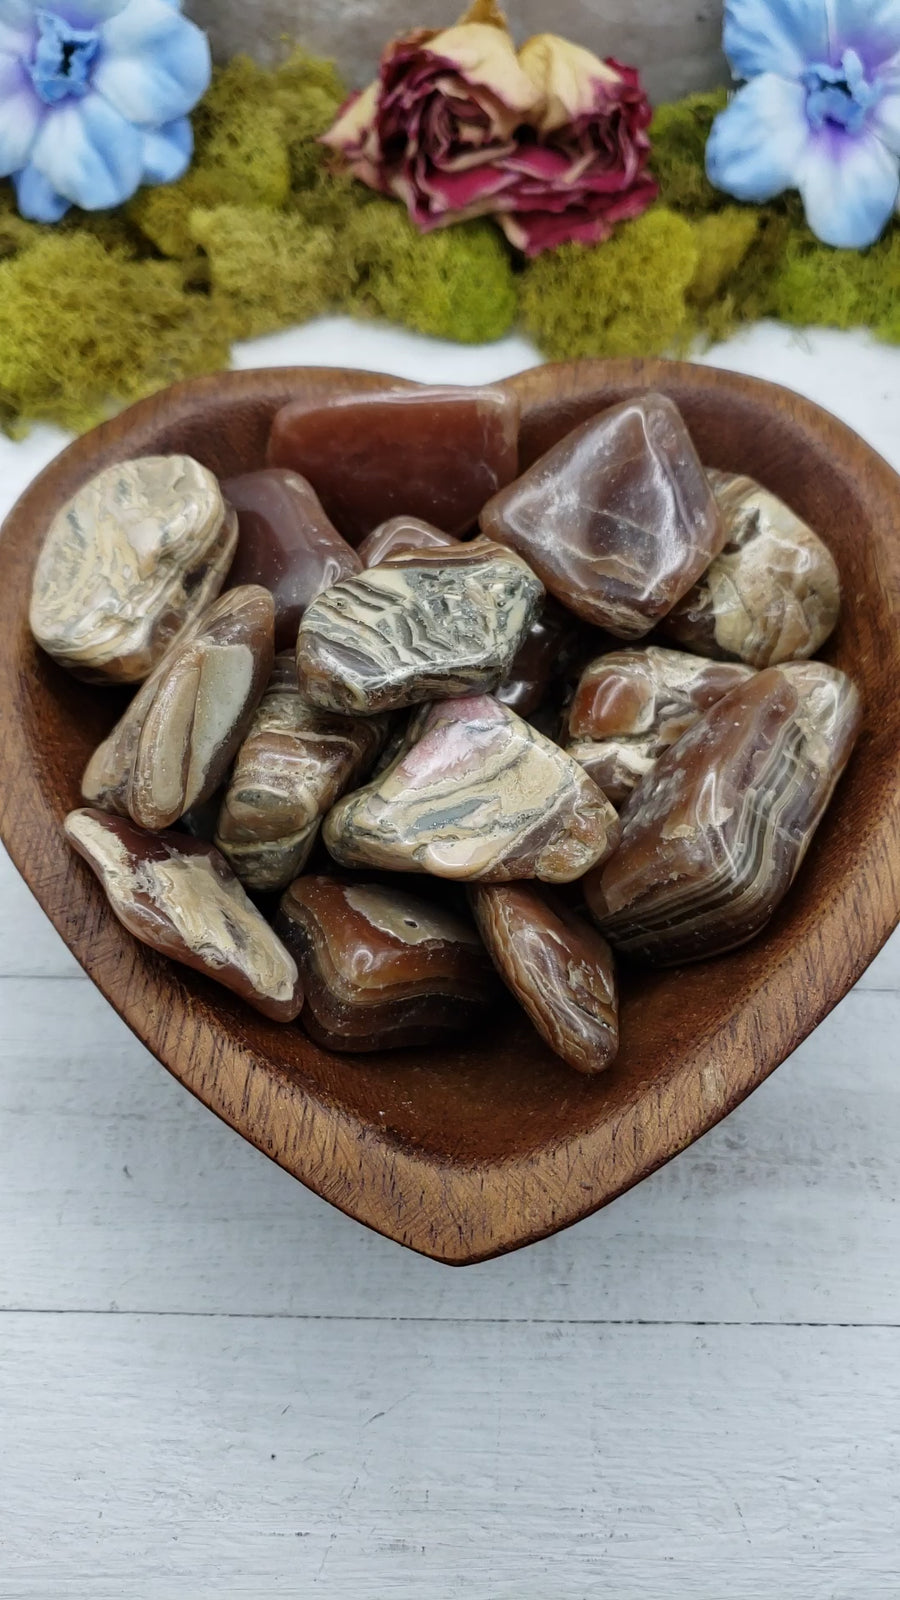 chocolate rhodocrosite stones in heart-shaped bowl